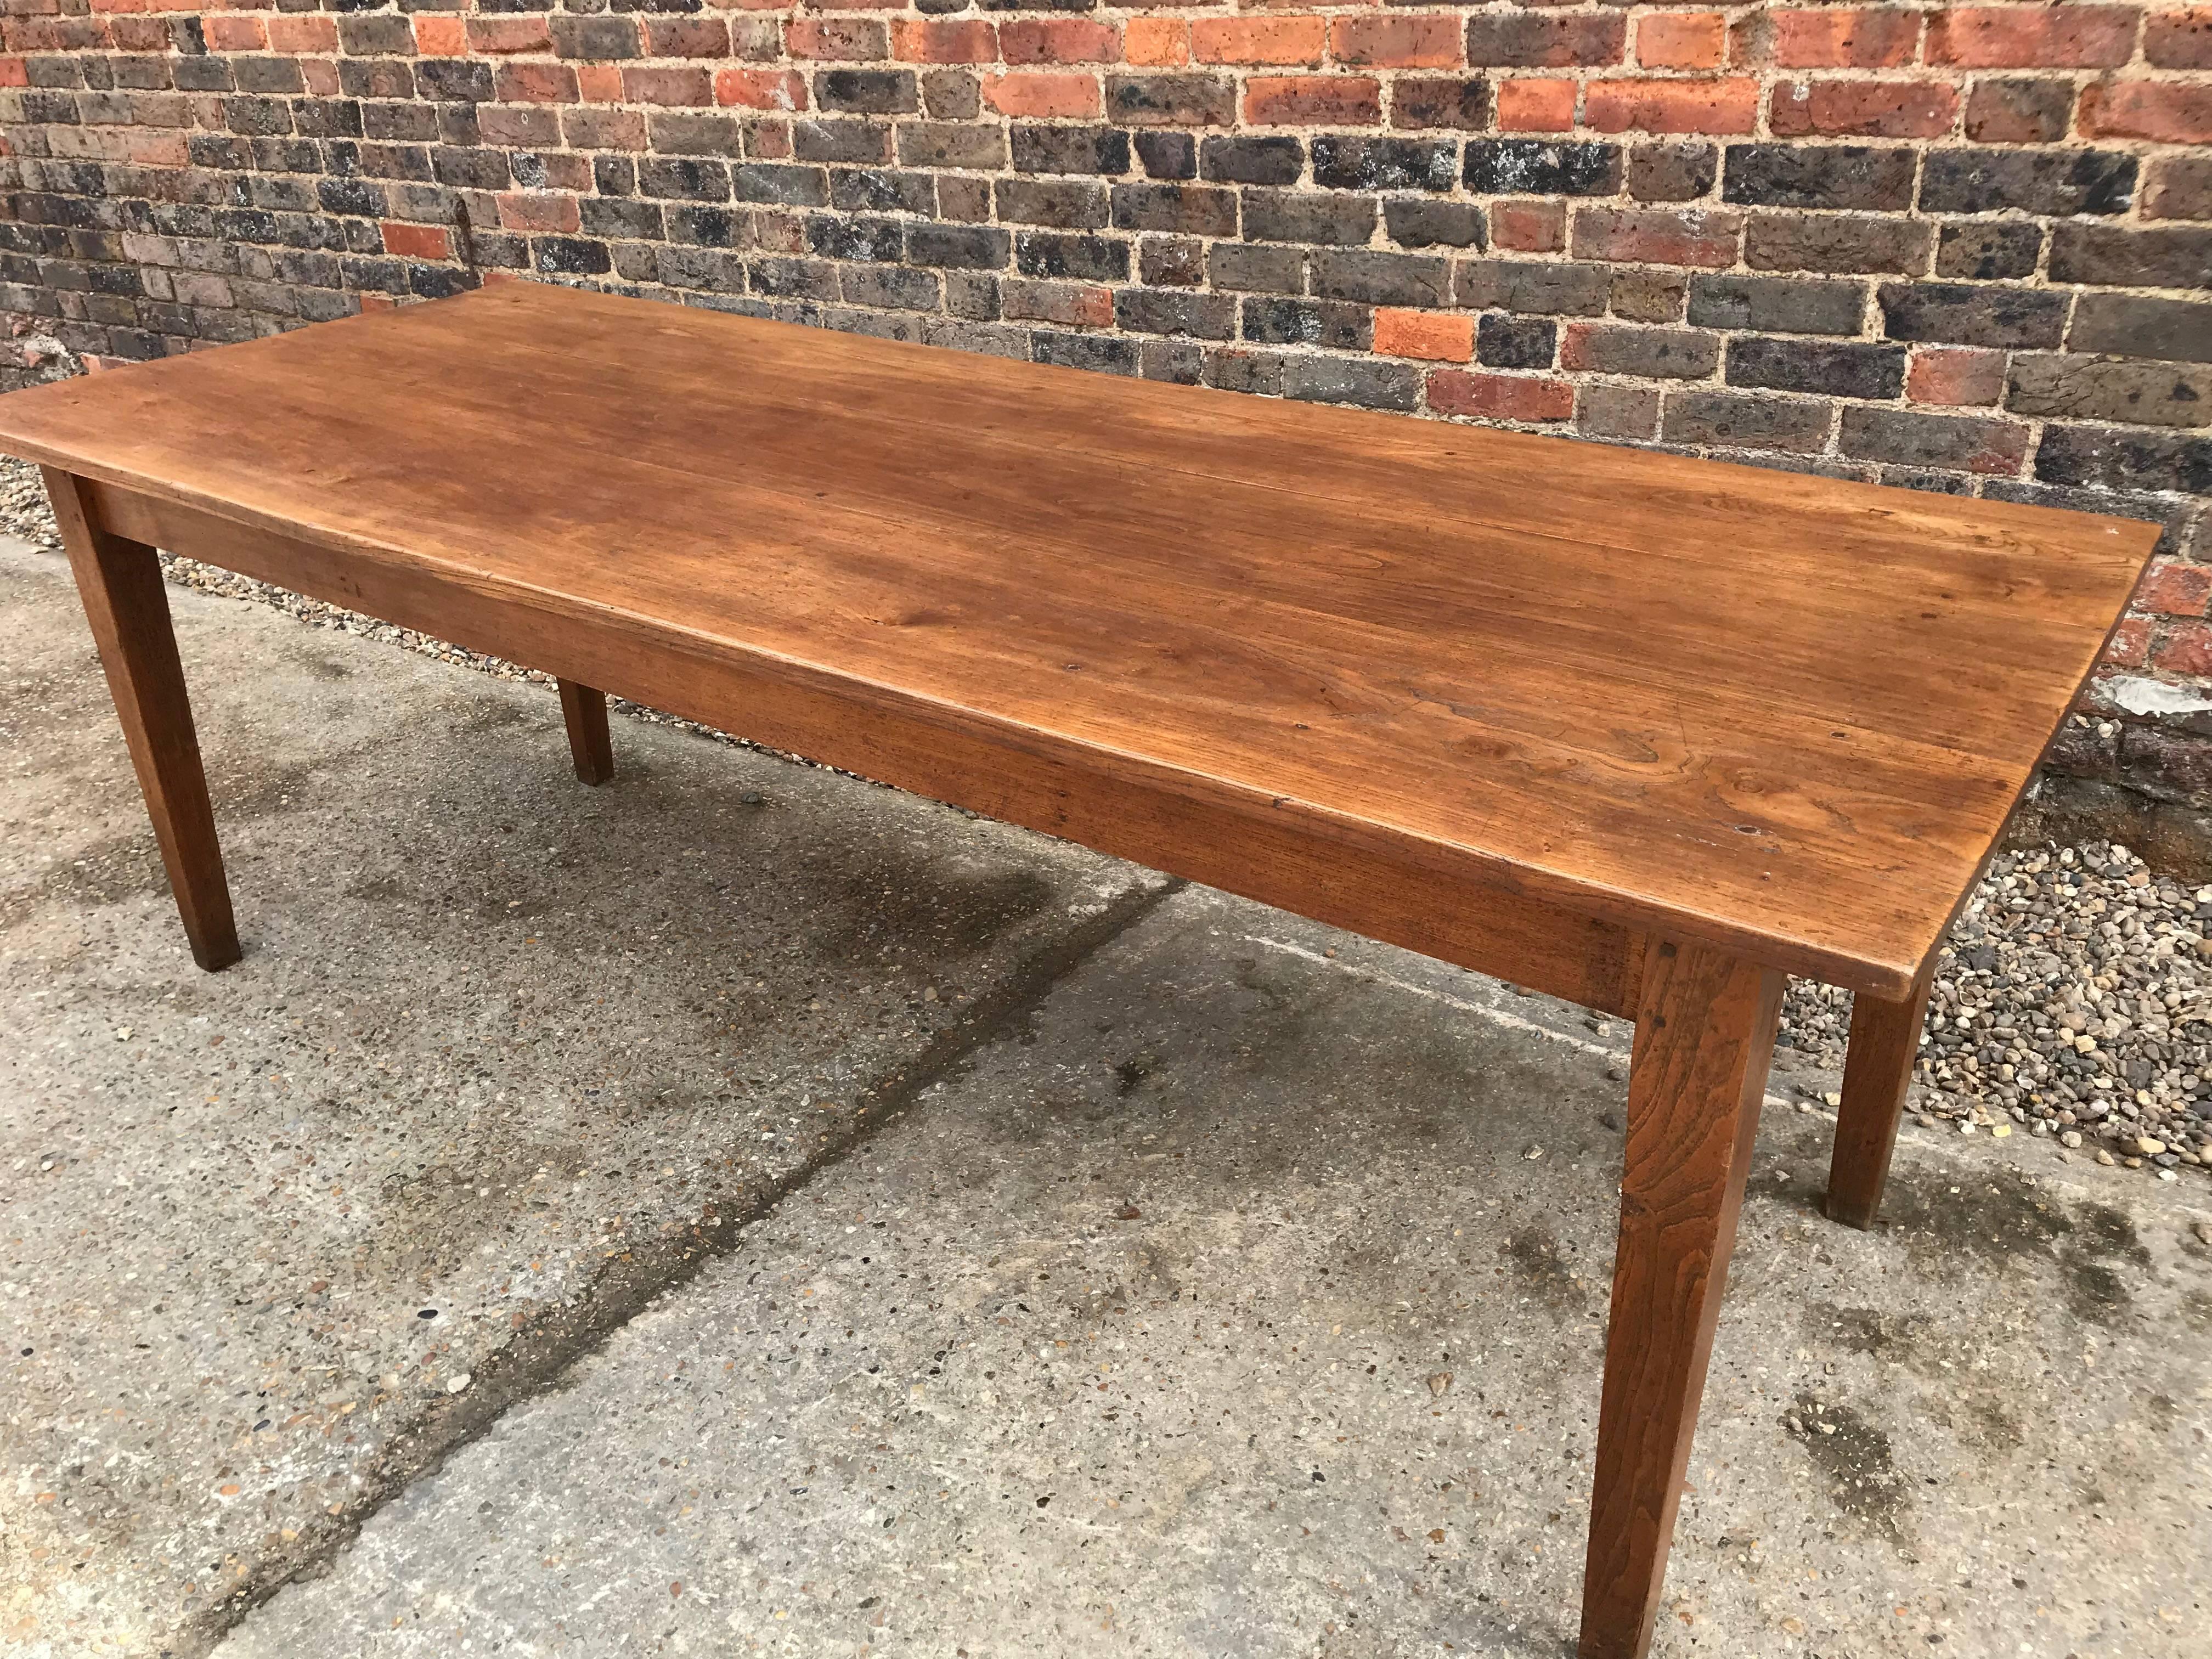 19th century elm antique French farmhouse table with tapered legs. French dining farmhouse table with lovely top and sits on four tapered legs. The table has a end drawer. Lovely patination and colour. Very simplet design with elegant